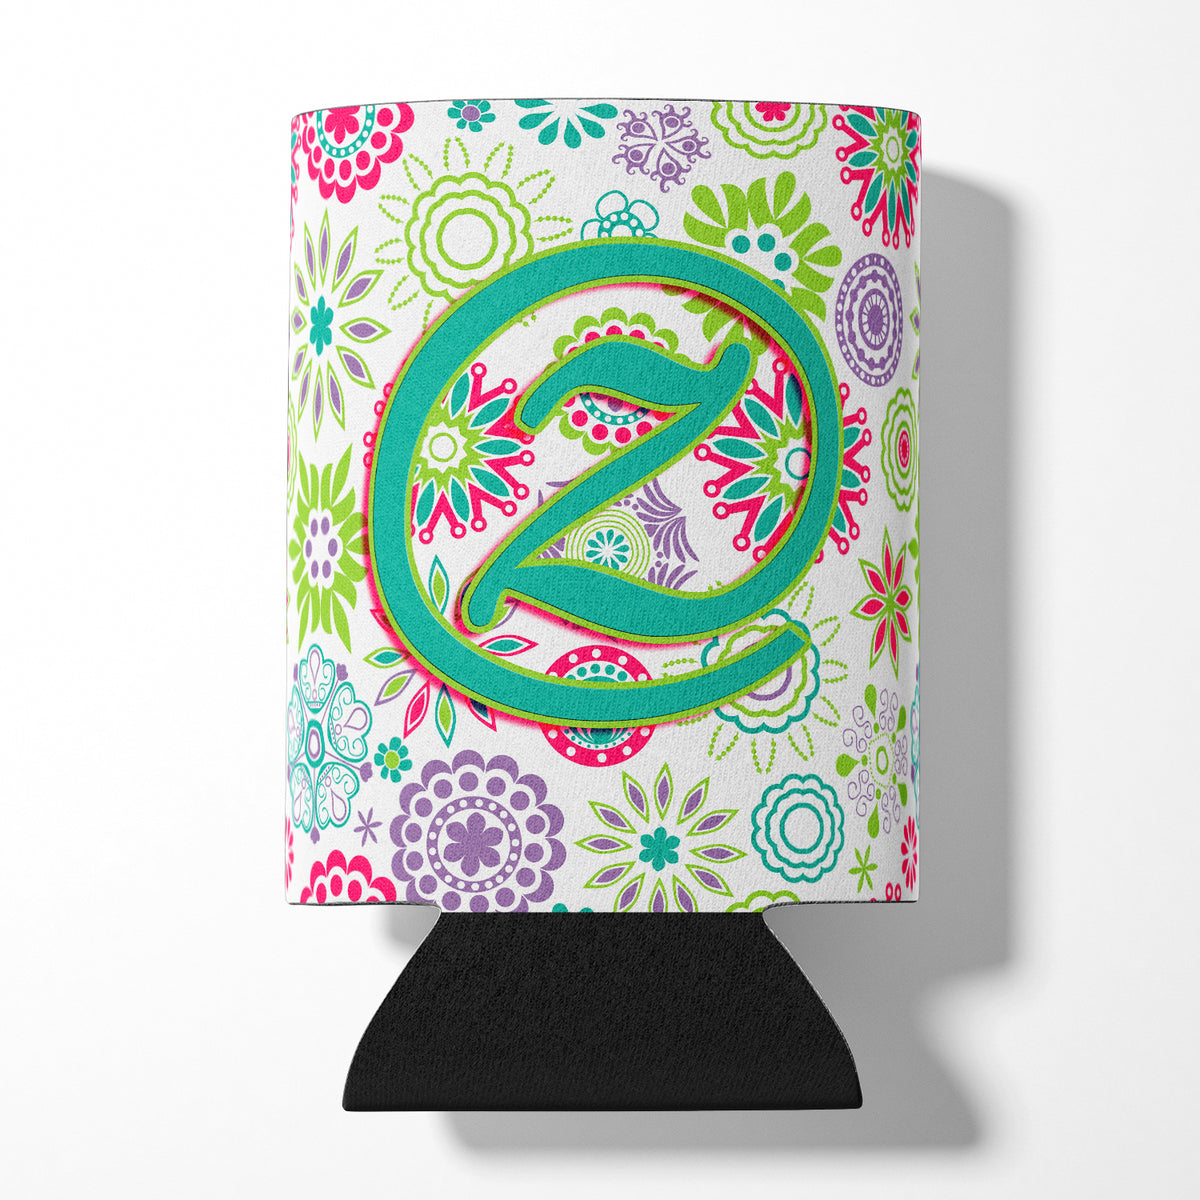 Letter Z Flowers Pink Teal Green Initial Can or Bottle Hugger CJ2011-ZCC  the-store.com.